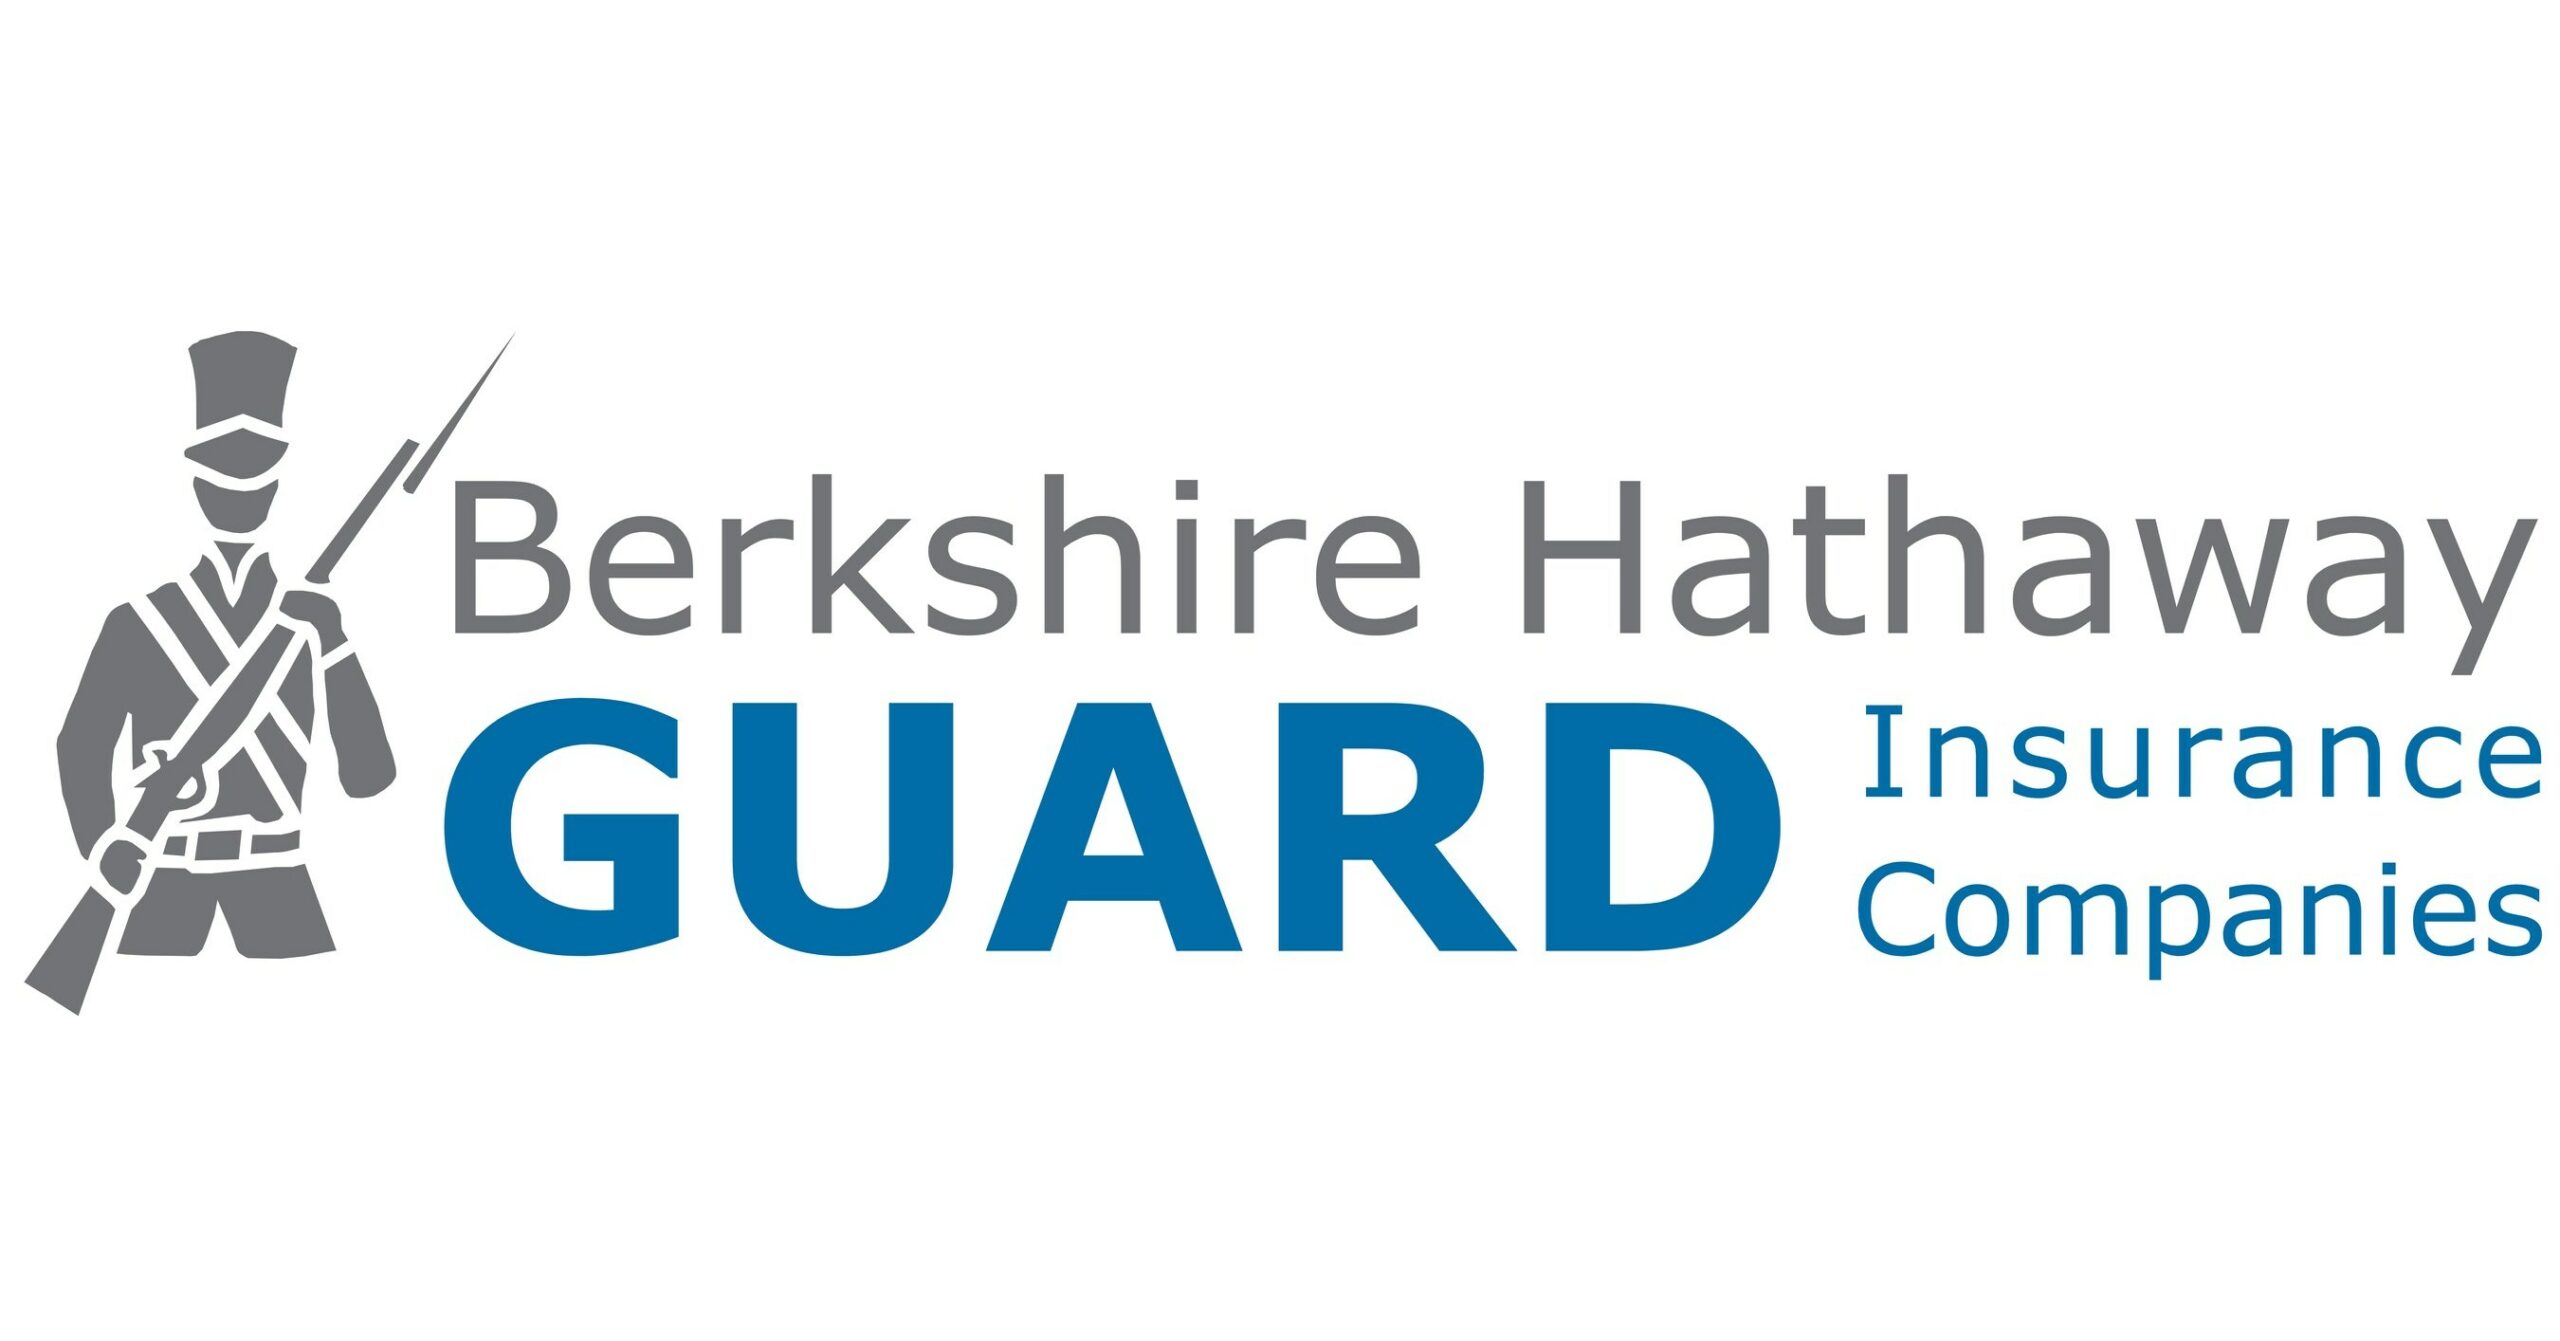 Logo of a company called "Berkshire Hathaway GUARD Insurance Companies" - first priority insurance